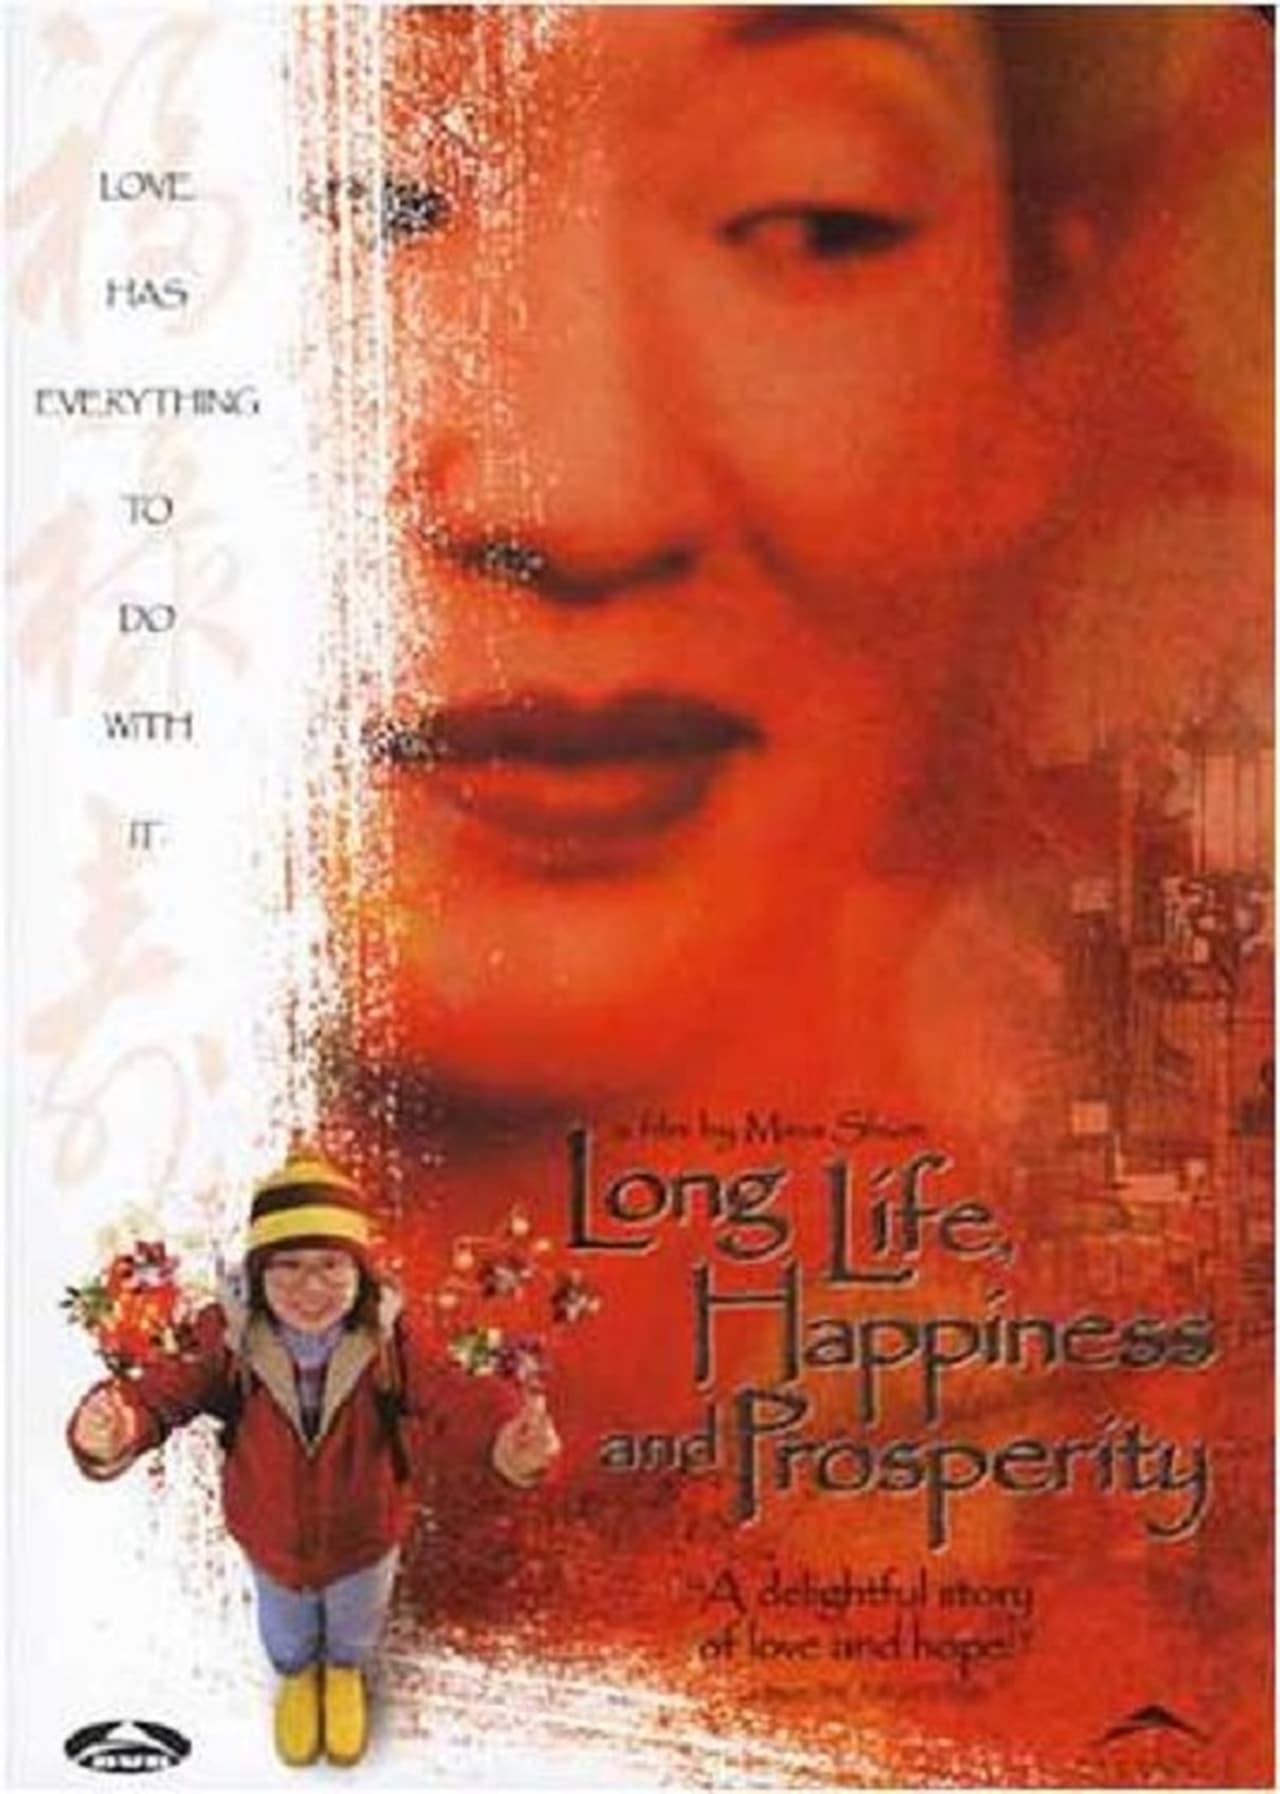 Long Life, Happiness and Prosperity poster